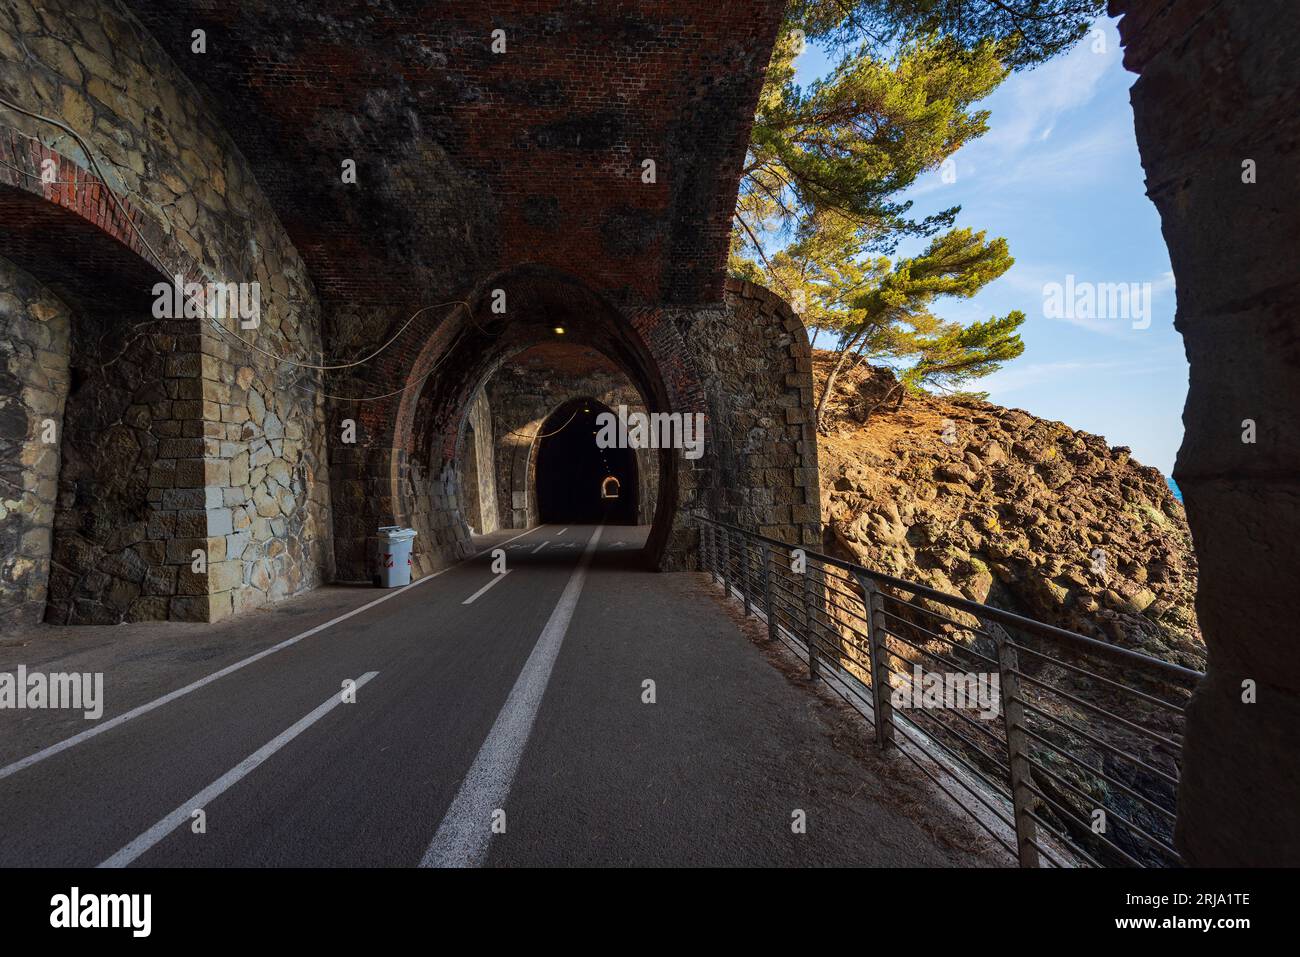 Bicycle and pedestrian path inside an old disused railroad tunnel. The road connects the three villages of Levanto, Bonassola and Framura, Liguria. Stock Photo